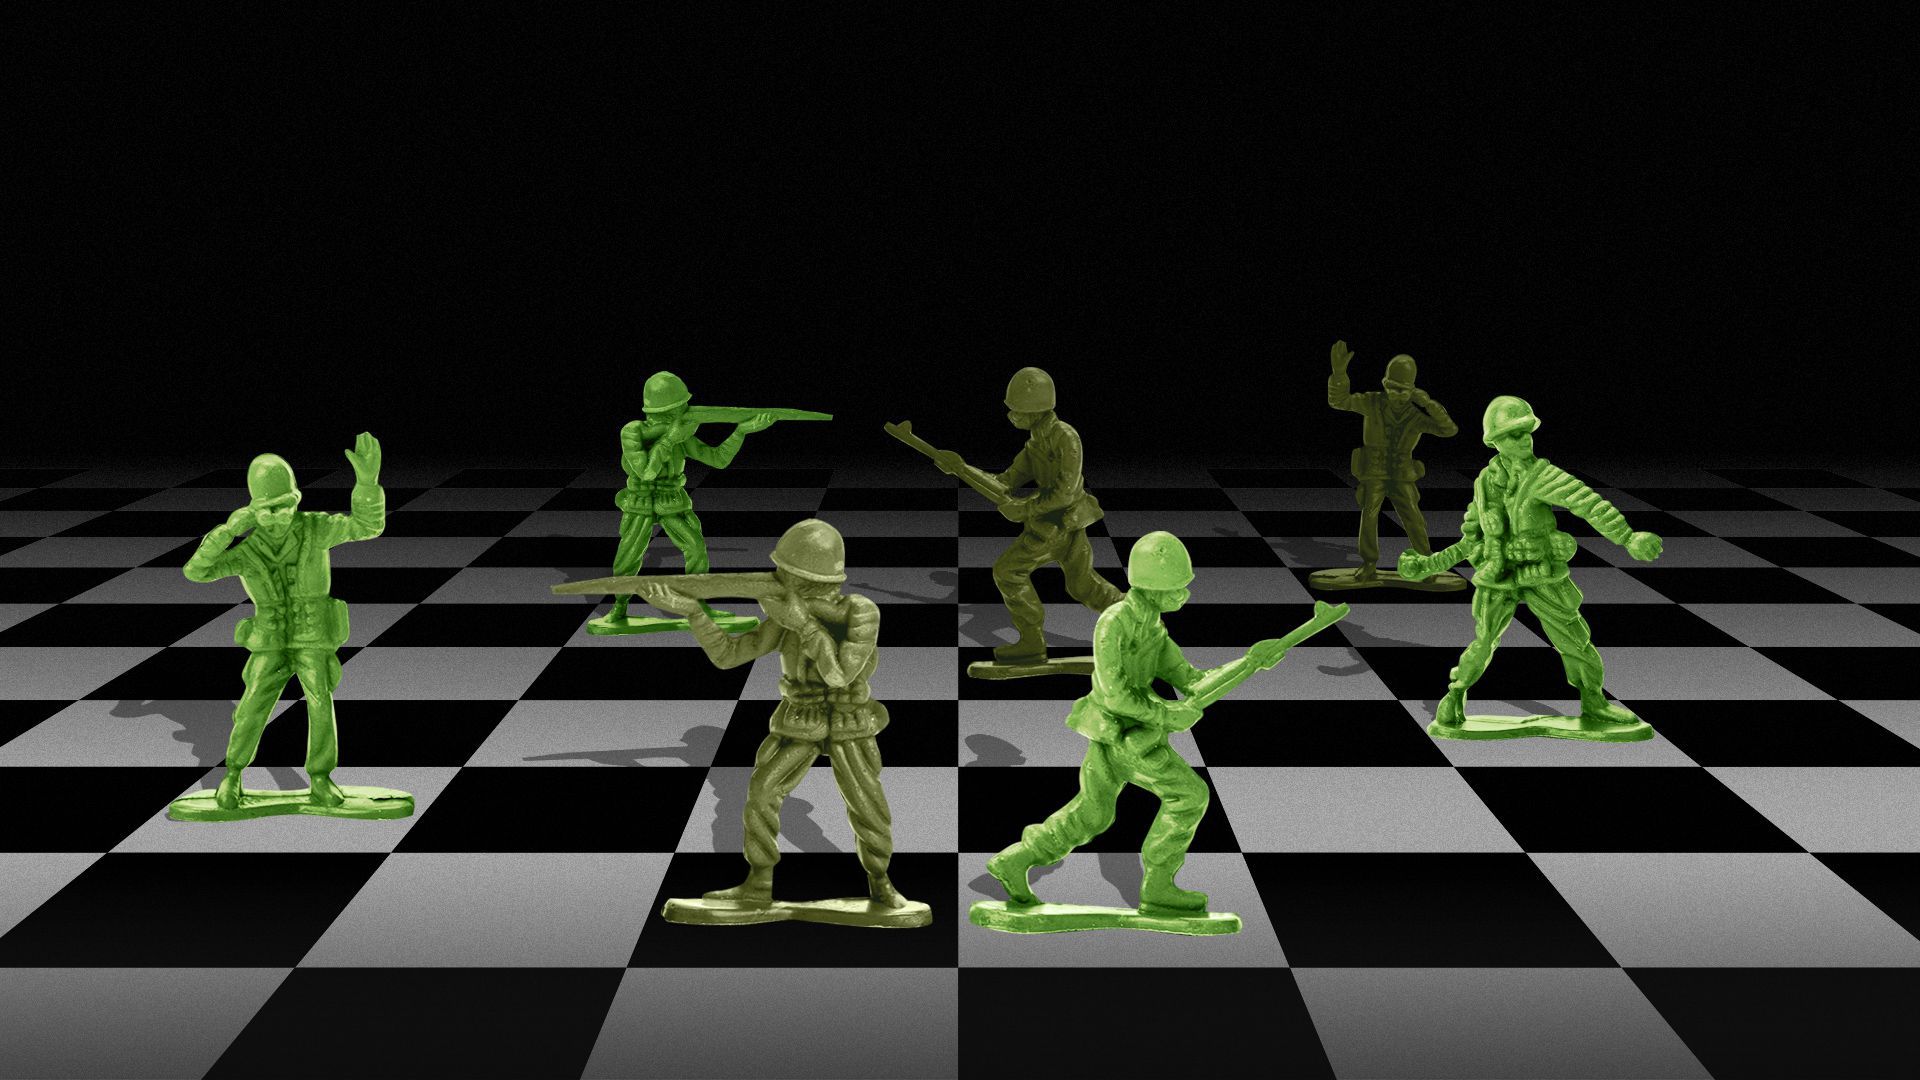 Illustration of toy army men on a chessboard. 